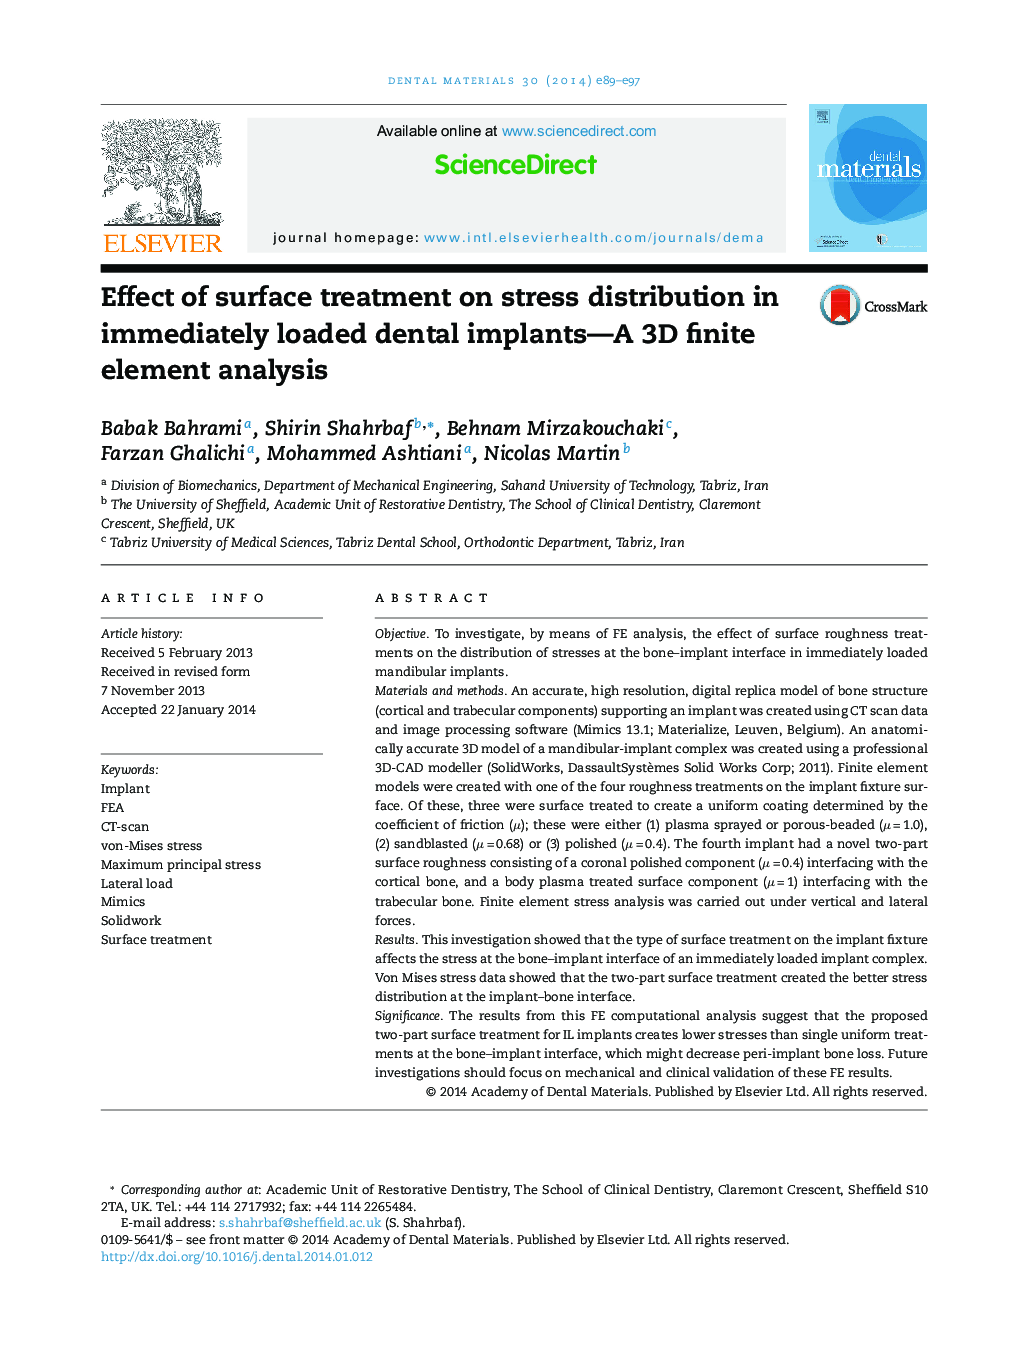 Effect of surface treatment on stress distribution in immediately loaded dental implants—A 3D finite element analysis